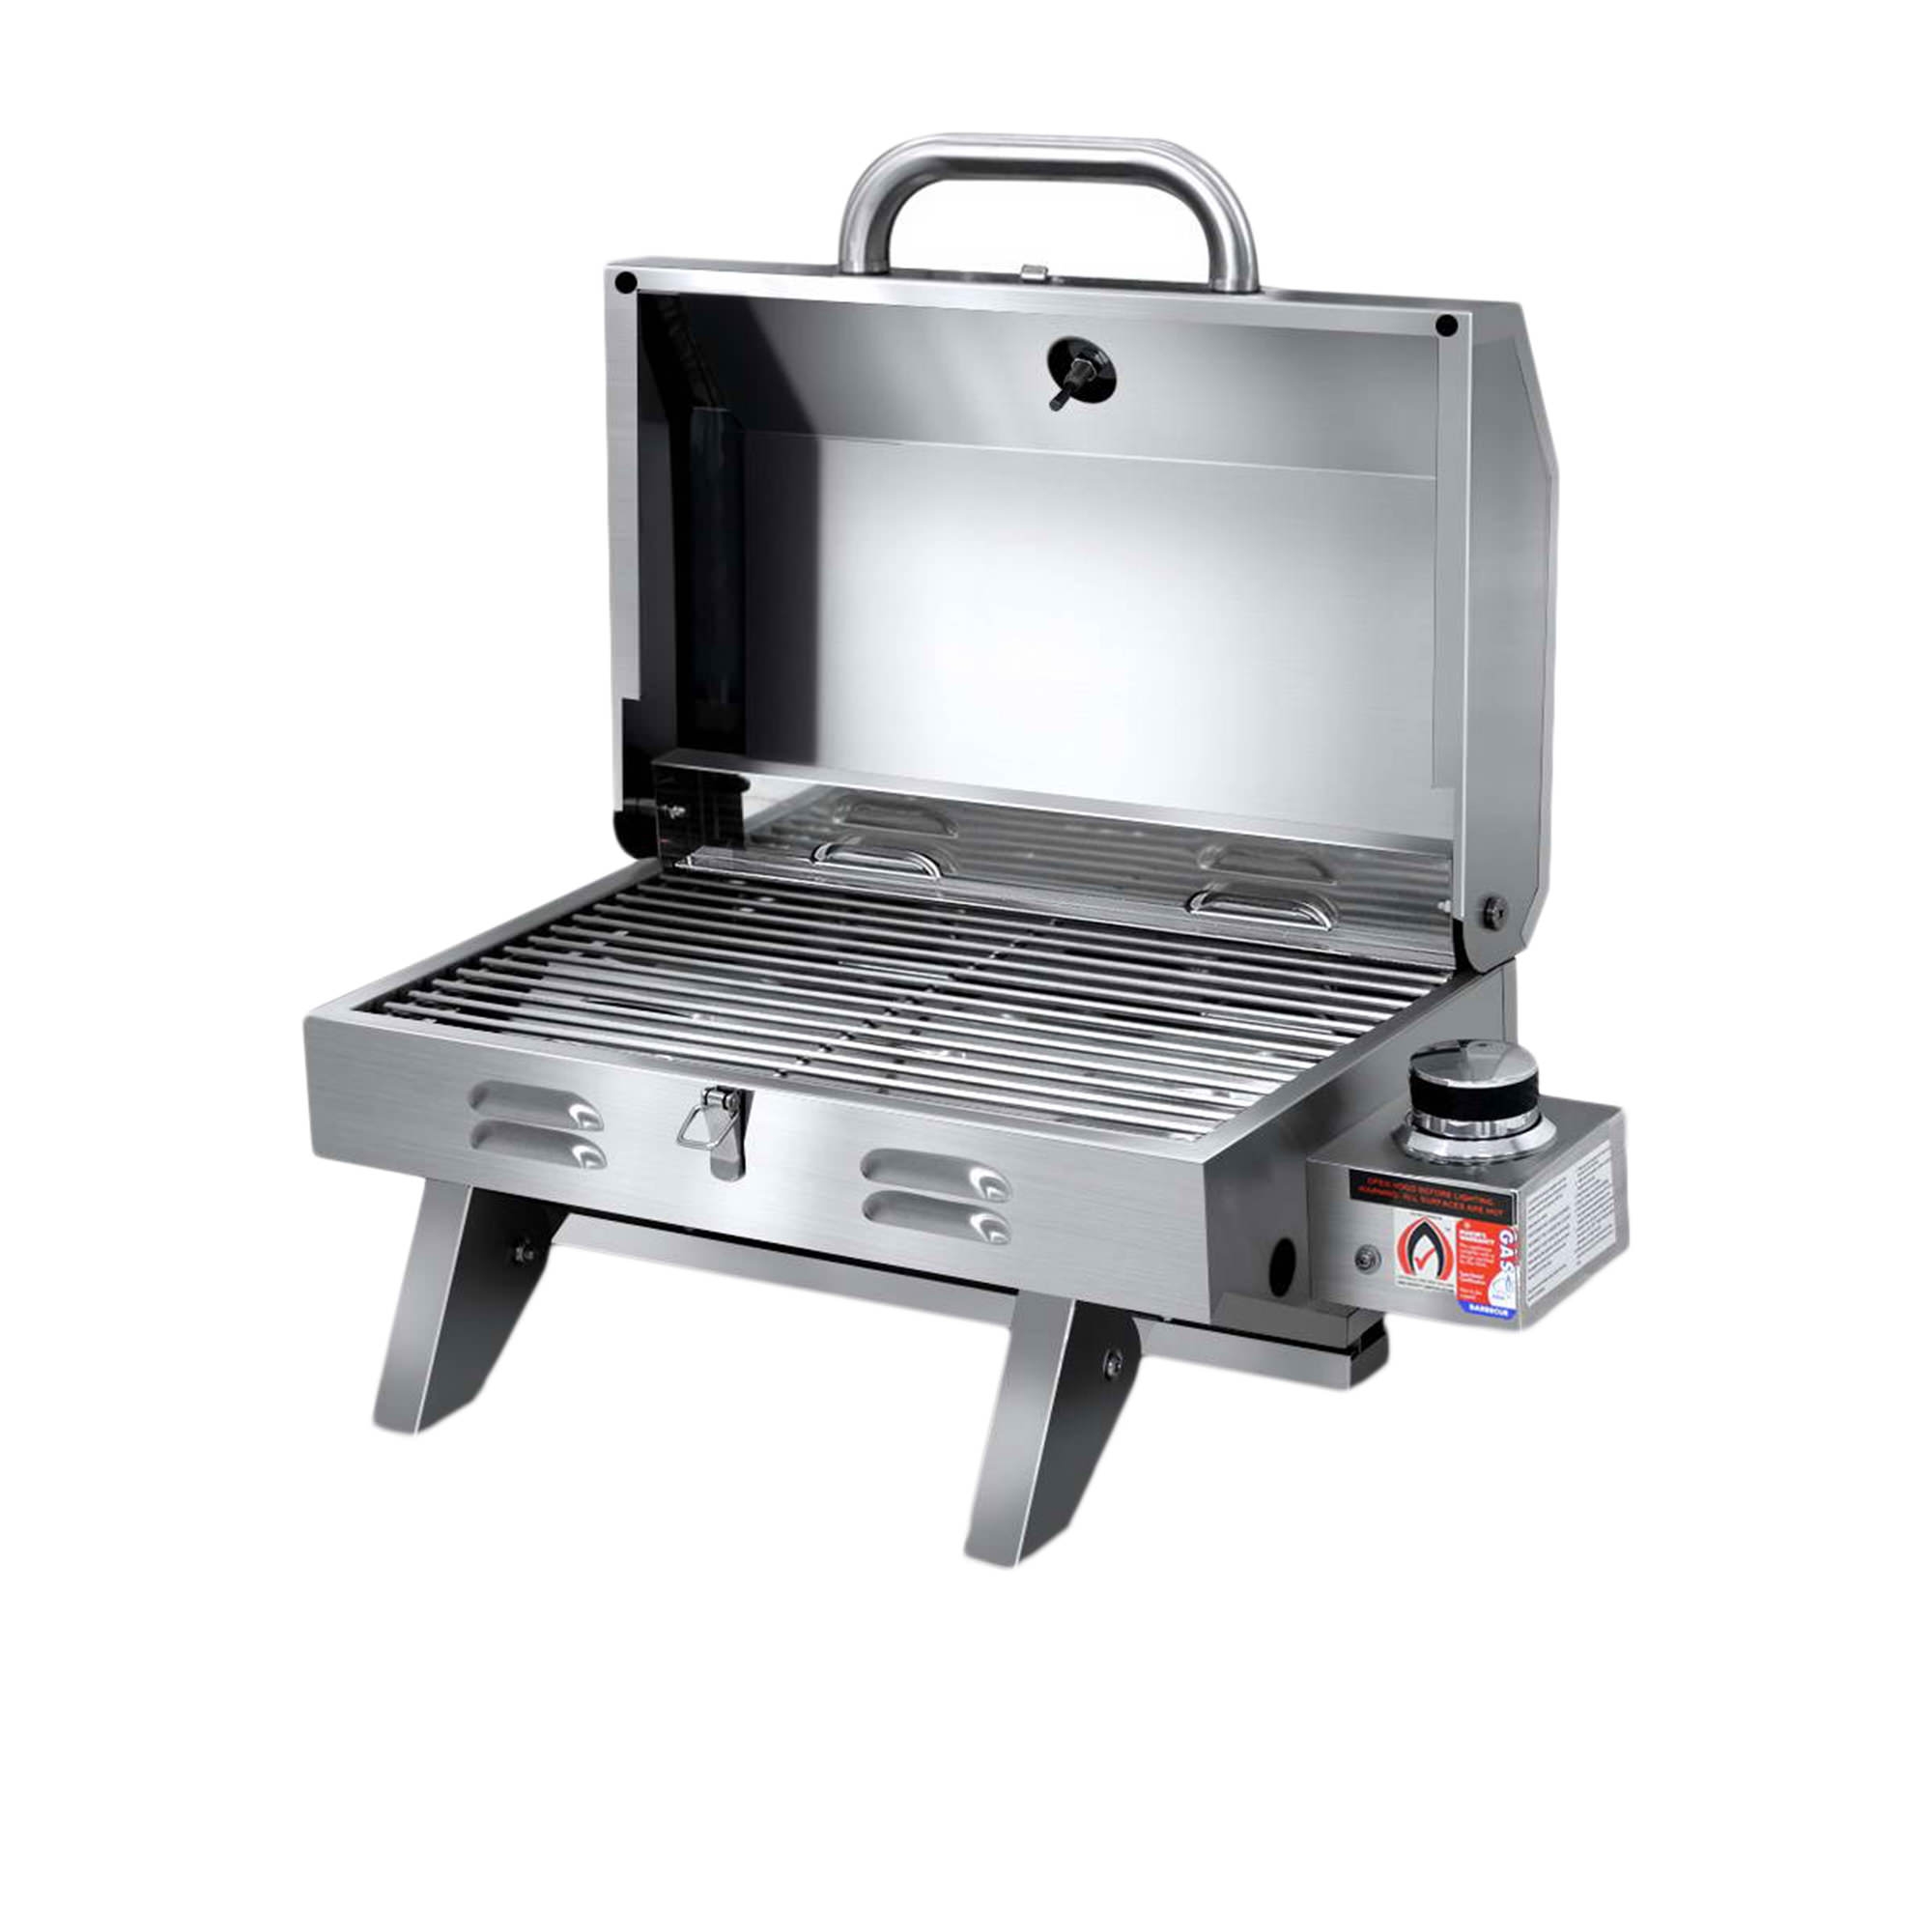 Grillz Gas Camping BBQ 60cm Image 1